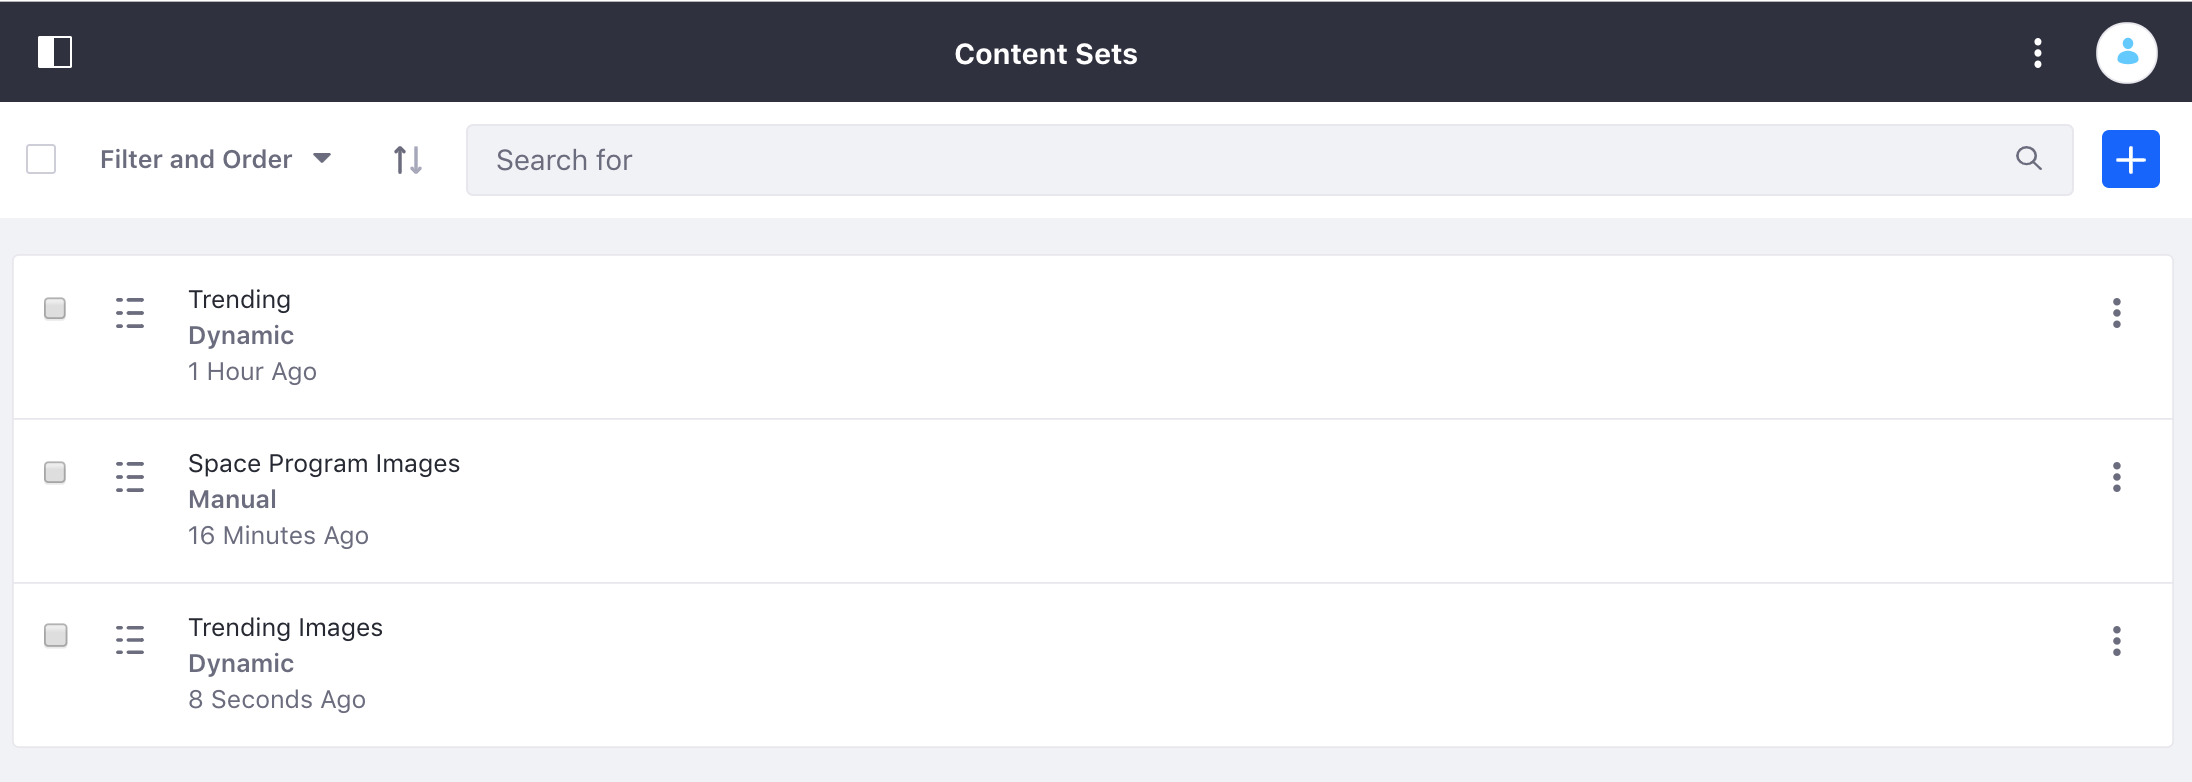 The Content Set is added right alongside any existing sets.